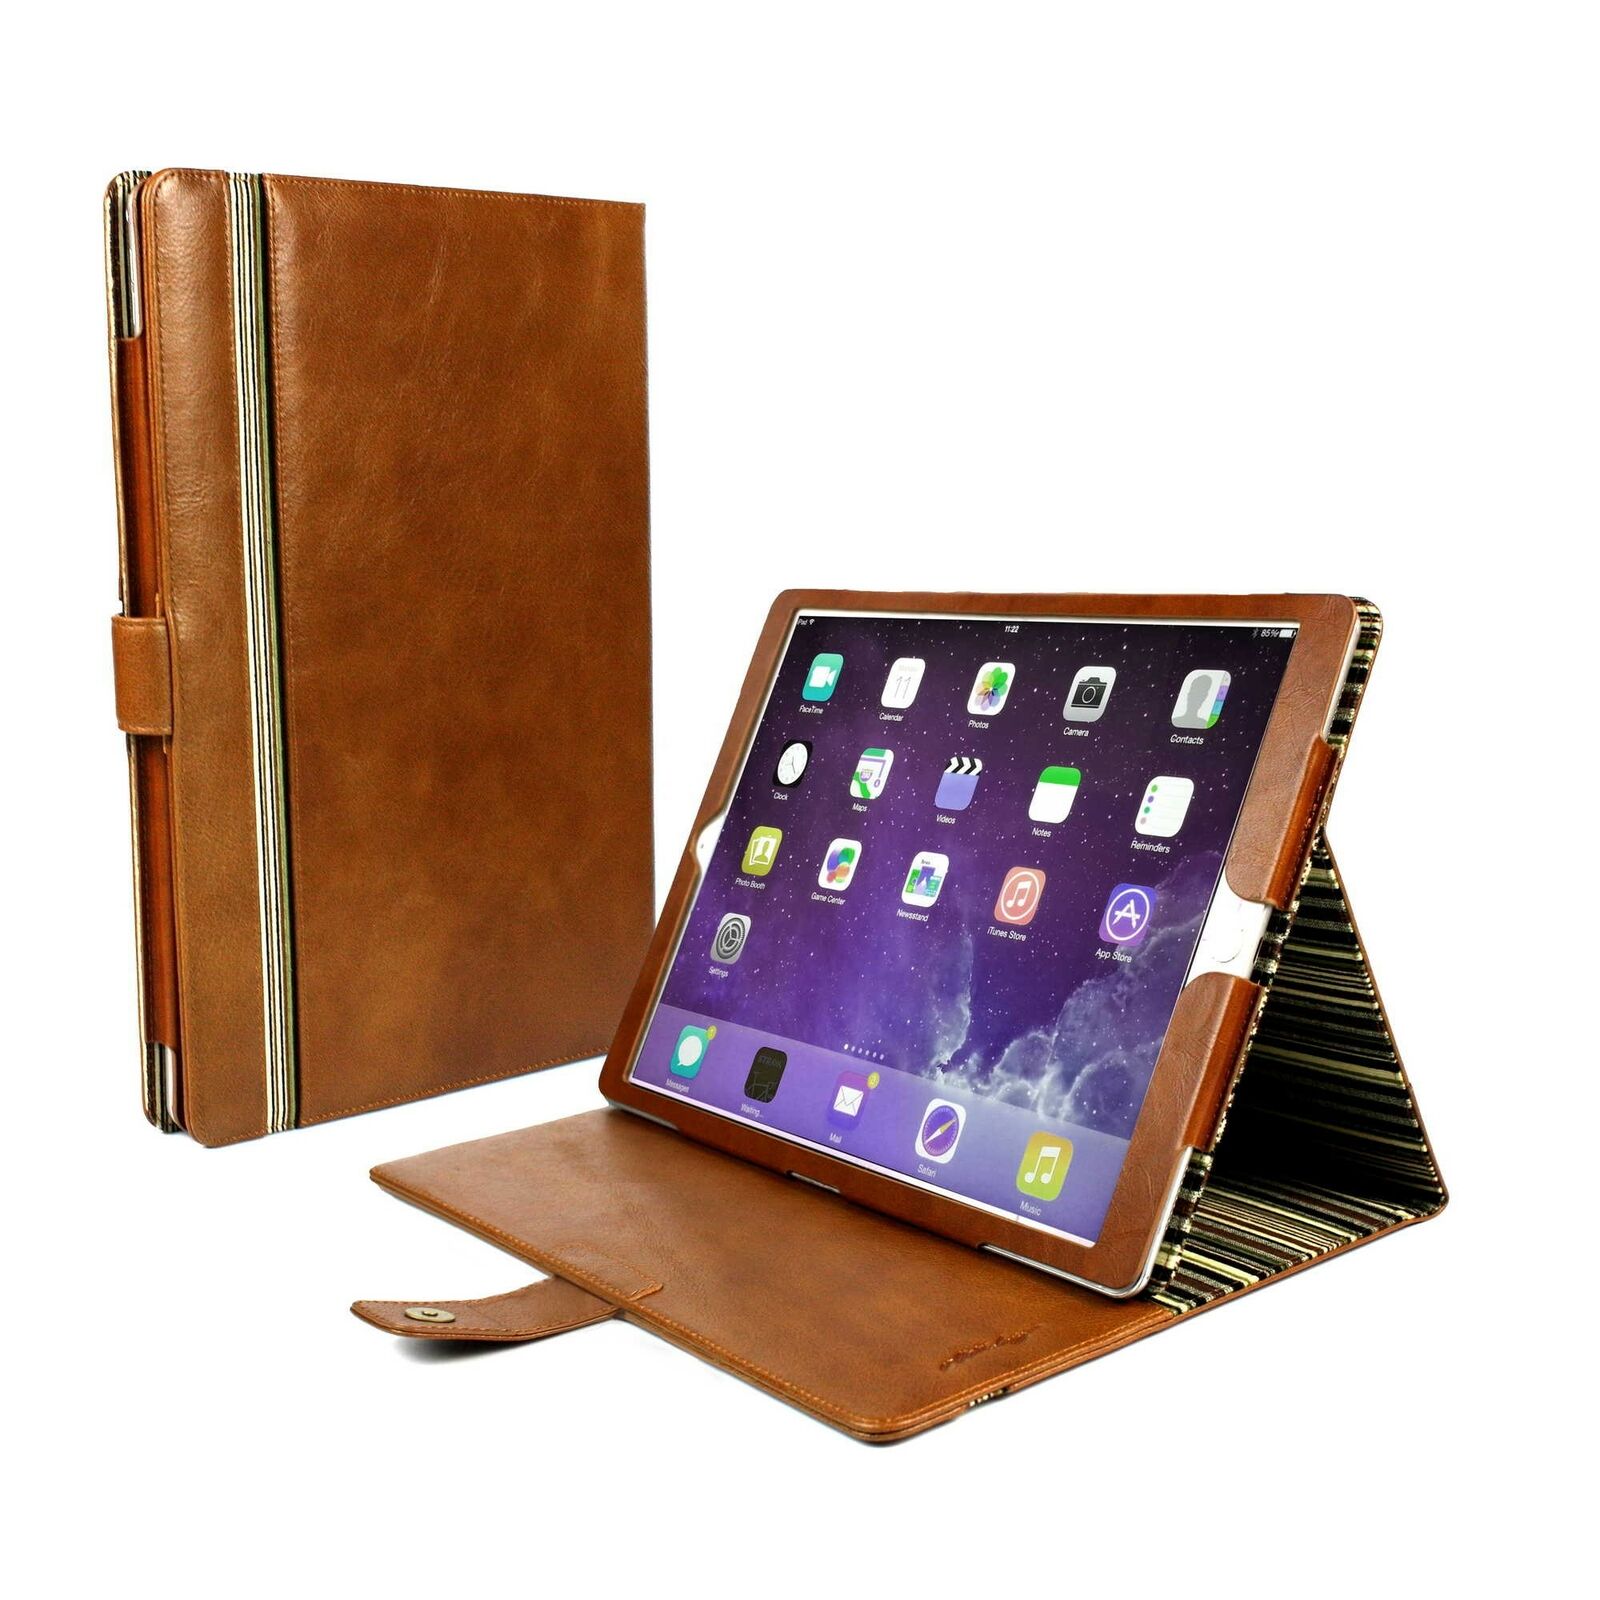 Alston Craig Genuine Leather Stand case for iPad Pro 9.7 / iPad Air 2 - Brown